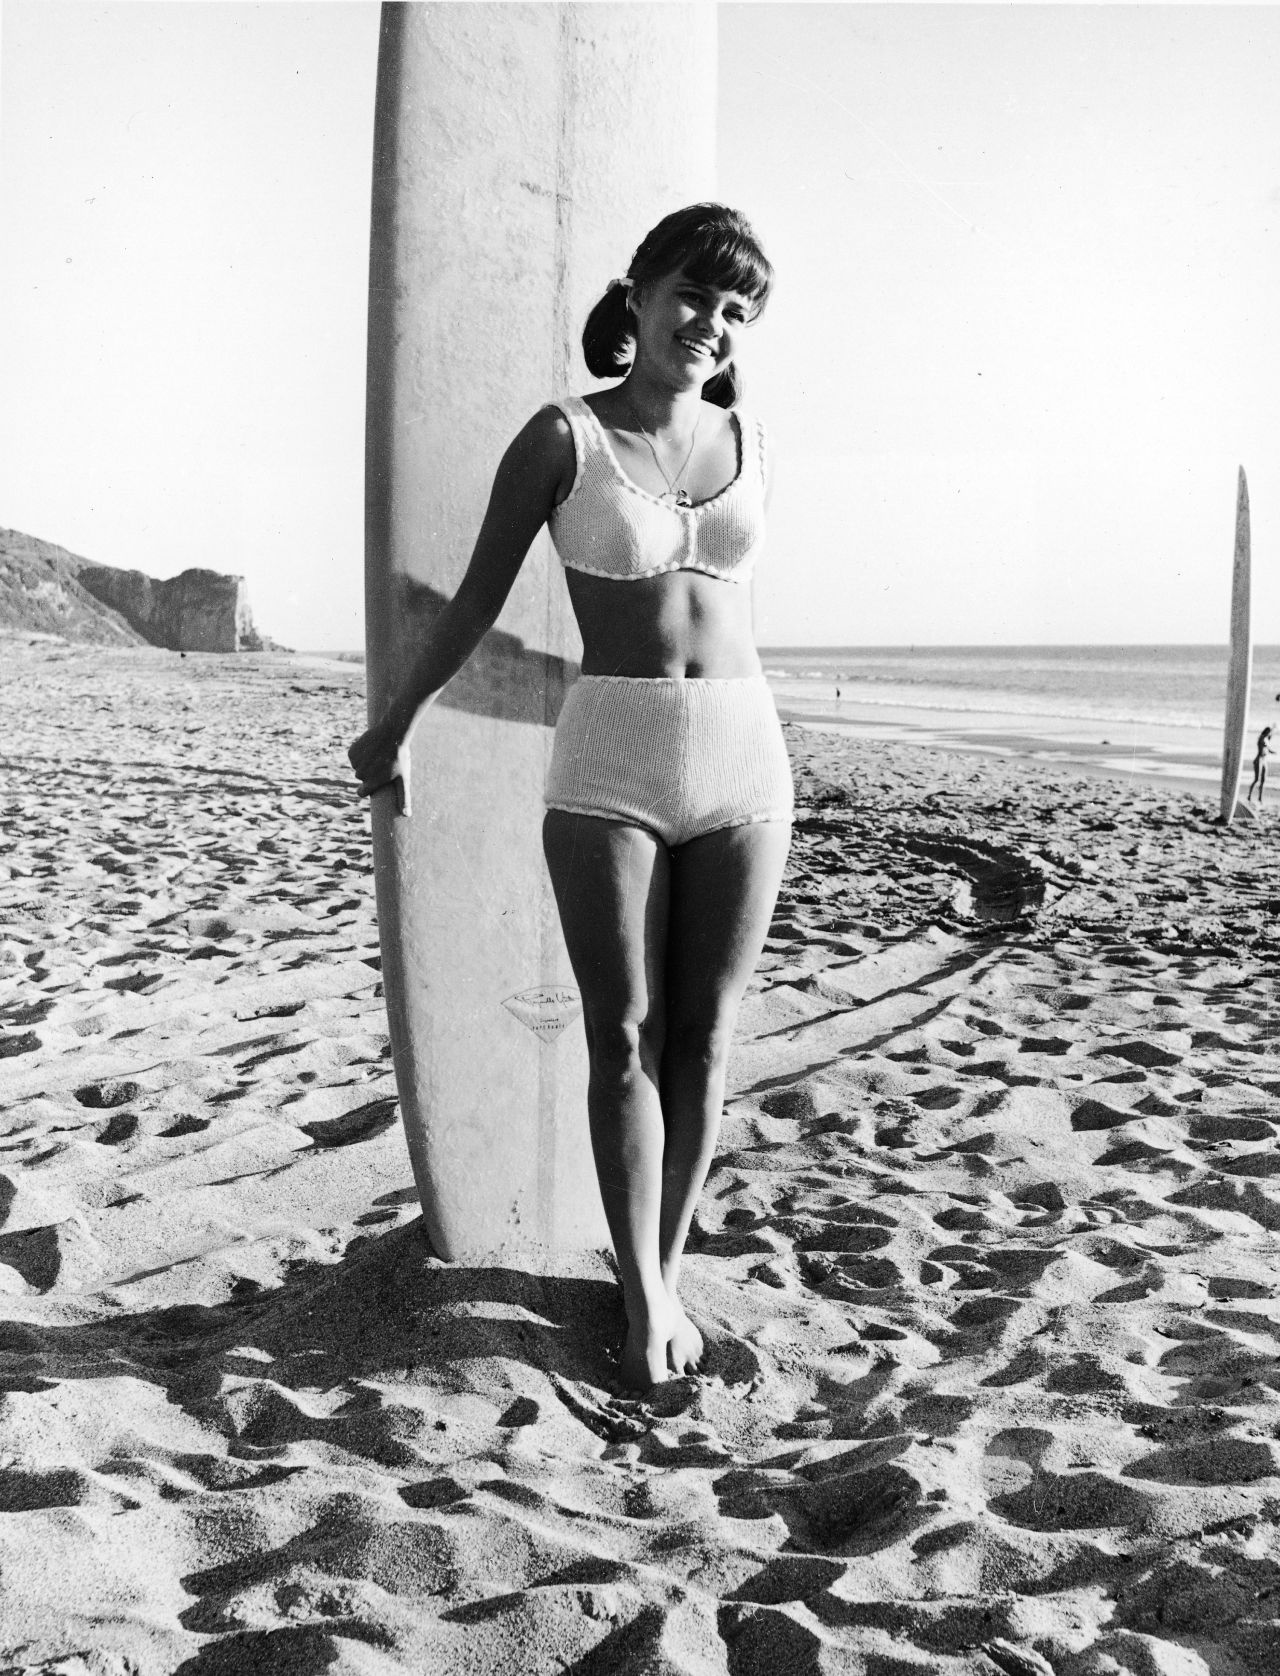 Field appears as the titular character in the television series "Gidget" in 1965. The show was her first starring role. She was adventurous, sassy and charming, and the surfing character <a href="https://www.cnn.com/2014/05/29/opinion/kohn-tv-women-60s-gidget/index.html" target="_blank">was a departure</a> from the mothers and housewives that made up many of the female characters duing the 1950s.